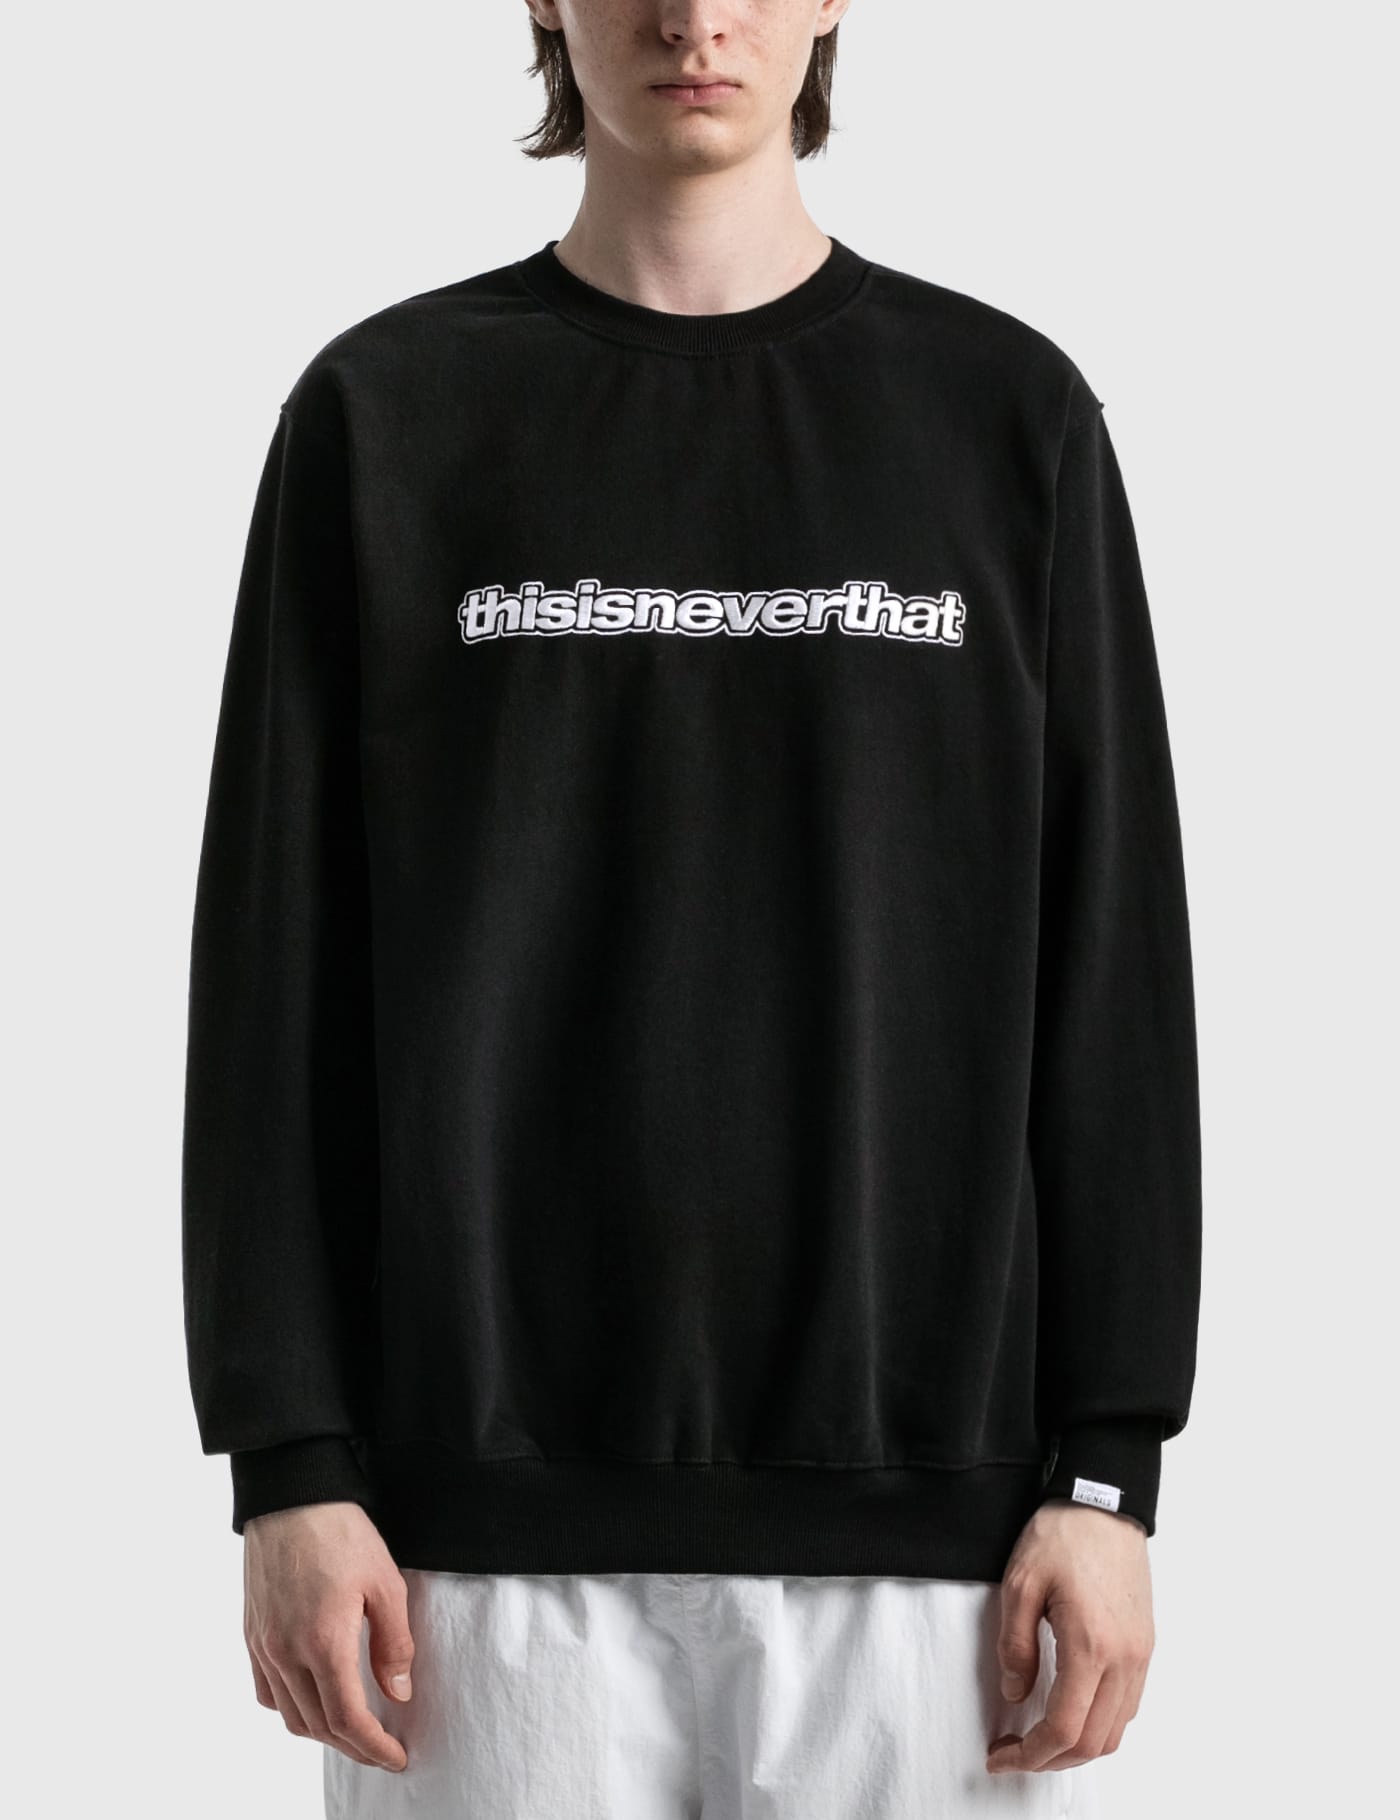 Thisisneverthat - Thisisneverthat Logo Crewneck | HBX - Globally Curated  Fashion and Lifestyle by Hypebeast